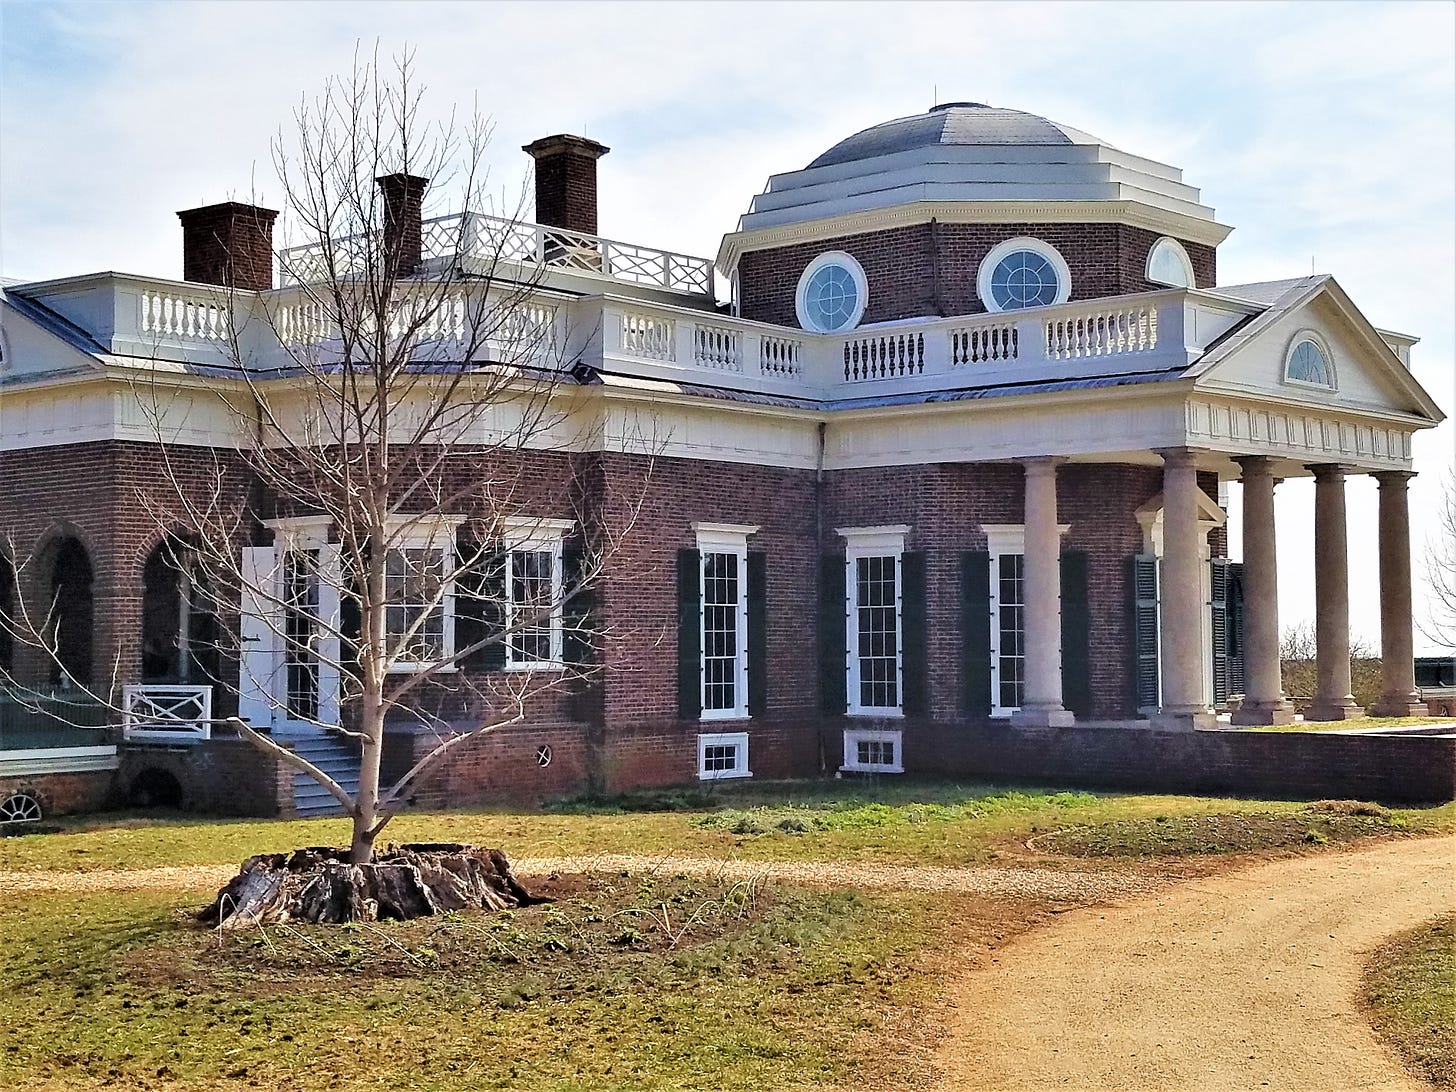 Monticello, a brick house with pillars on the front porch.